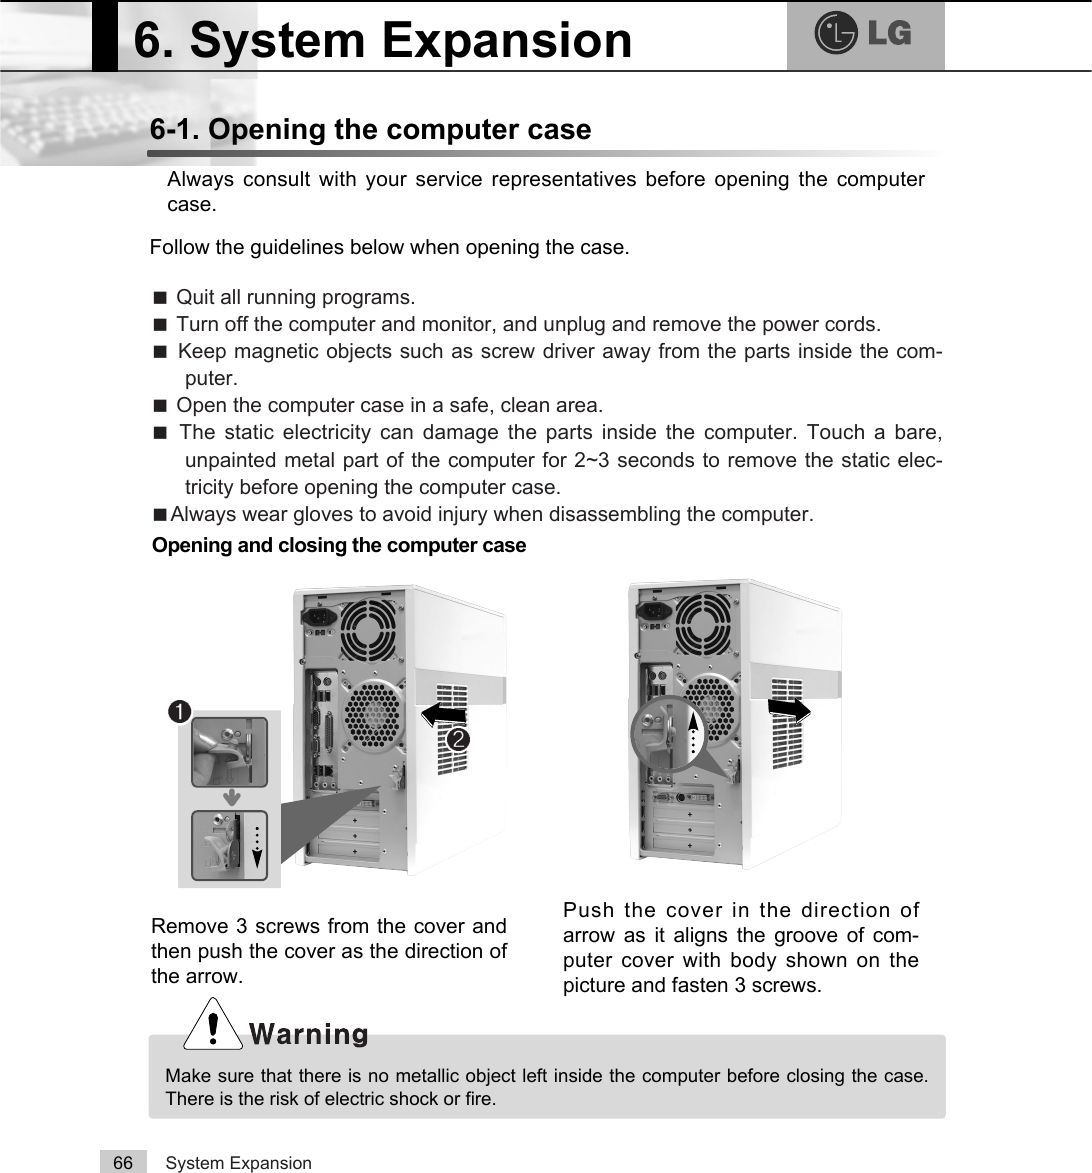 System Expansion666-1. Opening the computer caseAlways consult with your service representatives before opening the computercase.Follow the guidelines below when opening the case.Opening and closing the computer caseãQuit all running programs.ãTurn off the computer and monitor, and unplug and remove the power cords.ãKeep magnetic objects such as screw driver away from the parts inside the com-puter.ãOpen the computer case in a safe, clean area.ãThe static electricity can damage the parts inside the computer. Touch a bare,unpainted metal part of the computer for 2~3 seconds to remove the static elec-tricity before opening the computer case.ãAlways wear gloves to avoid injury when disassembling the computer.Make sure that there is no metallic object left inside the computer before closing the case.There is the risk of electric shock or fire.6. System Expansion℘ℙ⍰Push the cover in the direction ofarrow as it aligns the groove of com-puter cover with body shown on thepicture and fasten 3 screws.Remove 3 screws from the cover andthen push the cover as the direction ofthe arrow.